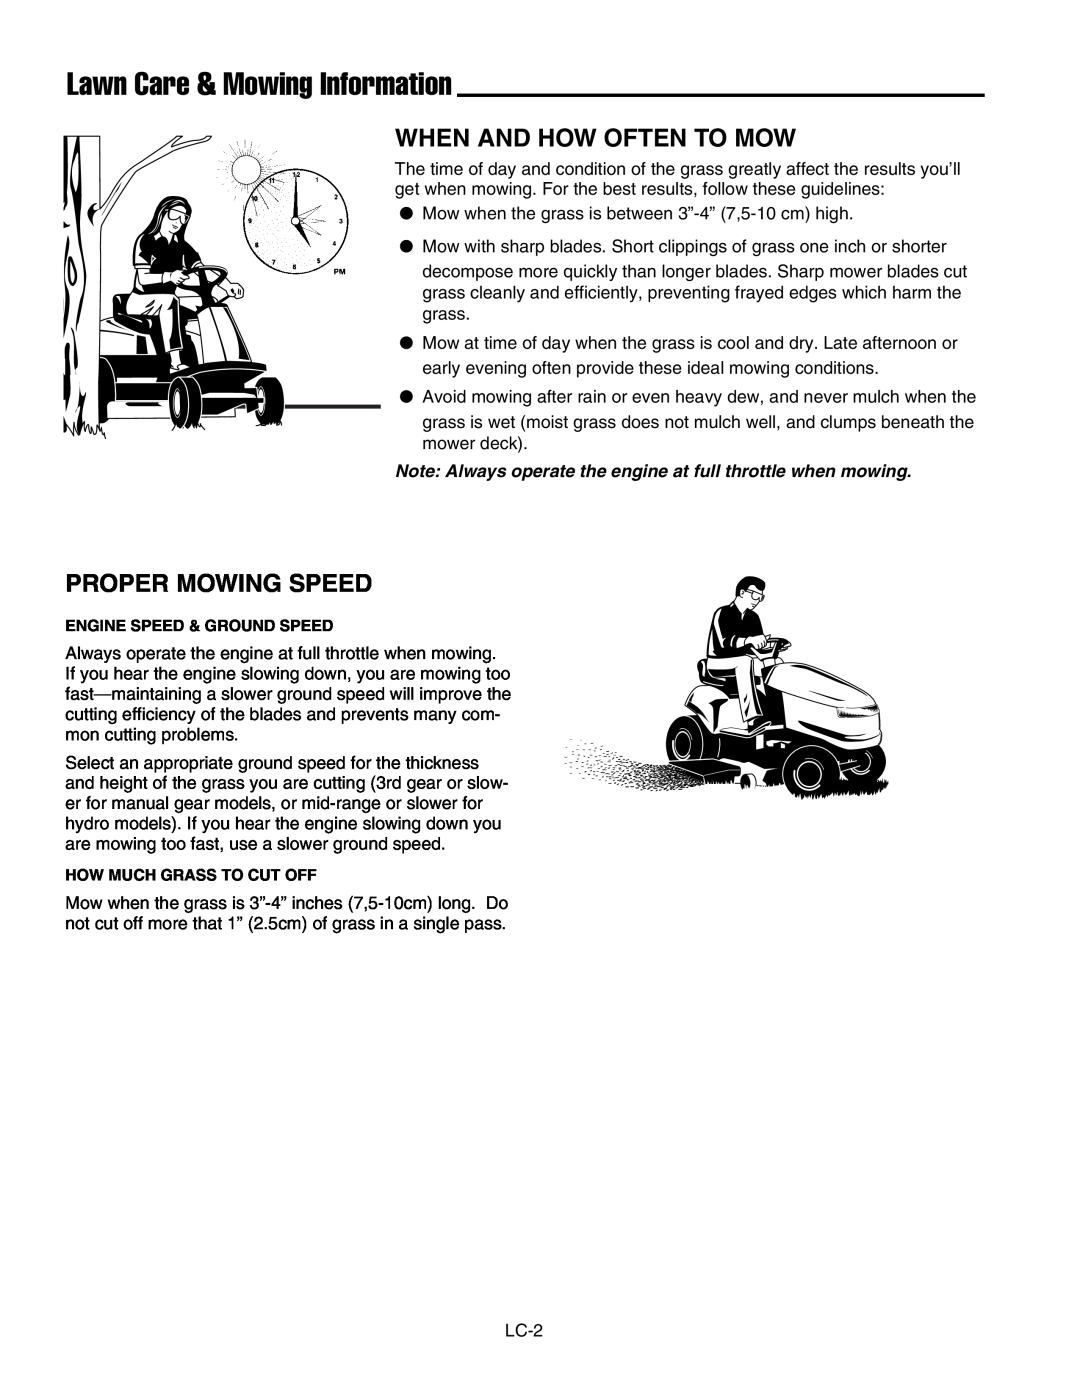 Snapper 400 / 2400 manual When And How Often To Mow, Proper Mowing Speed, Lawn Care & Mowing Information 